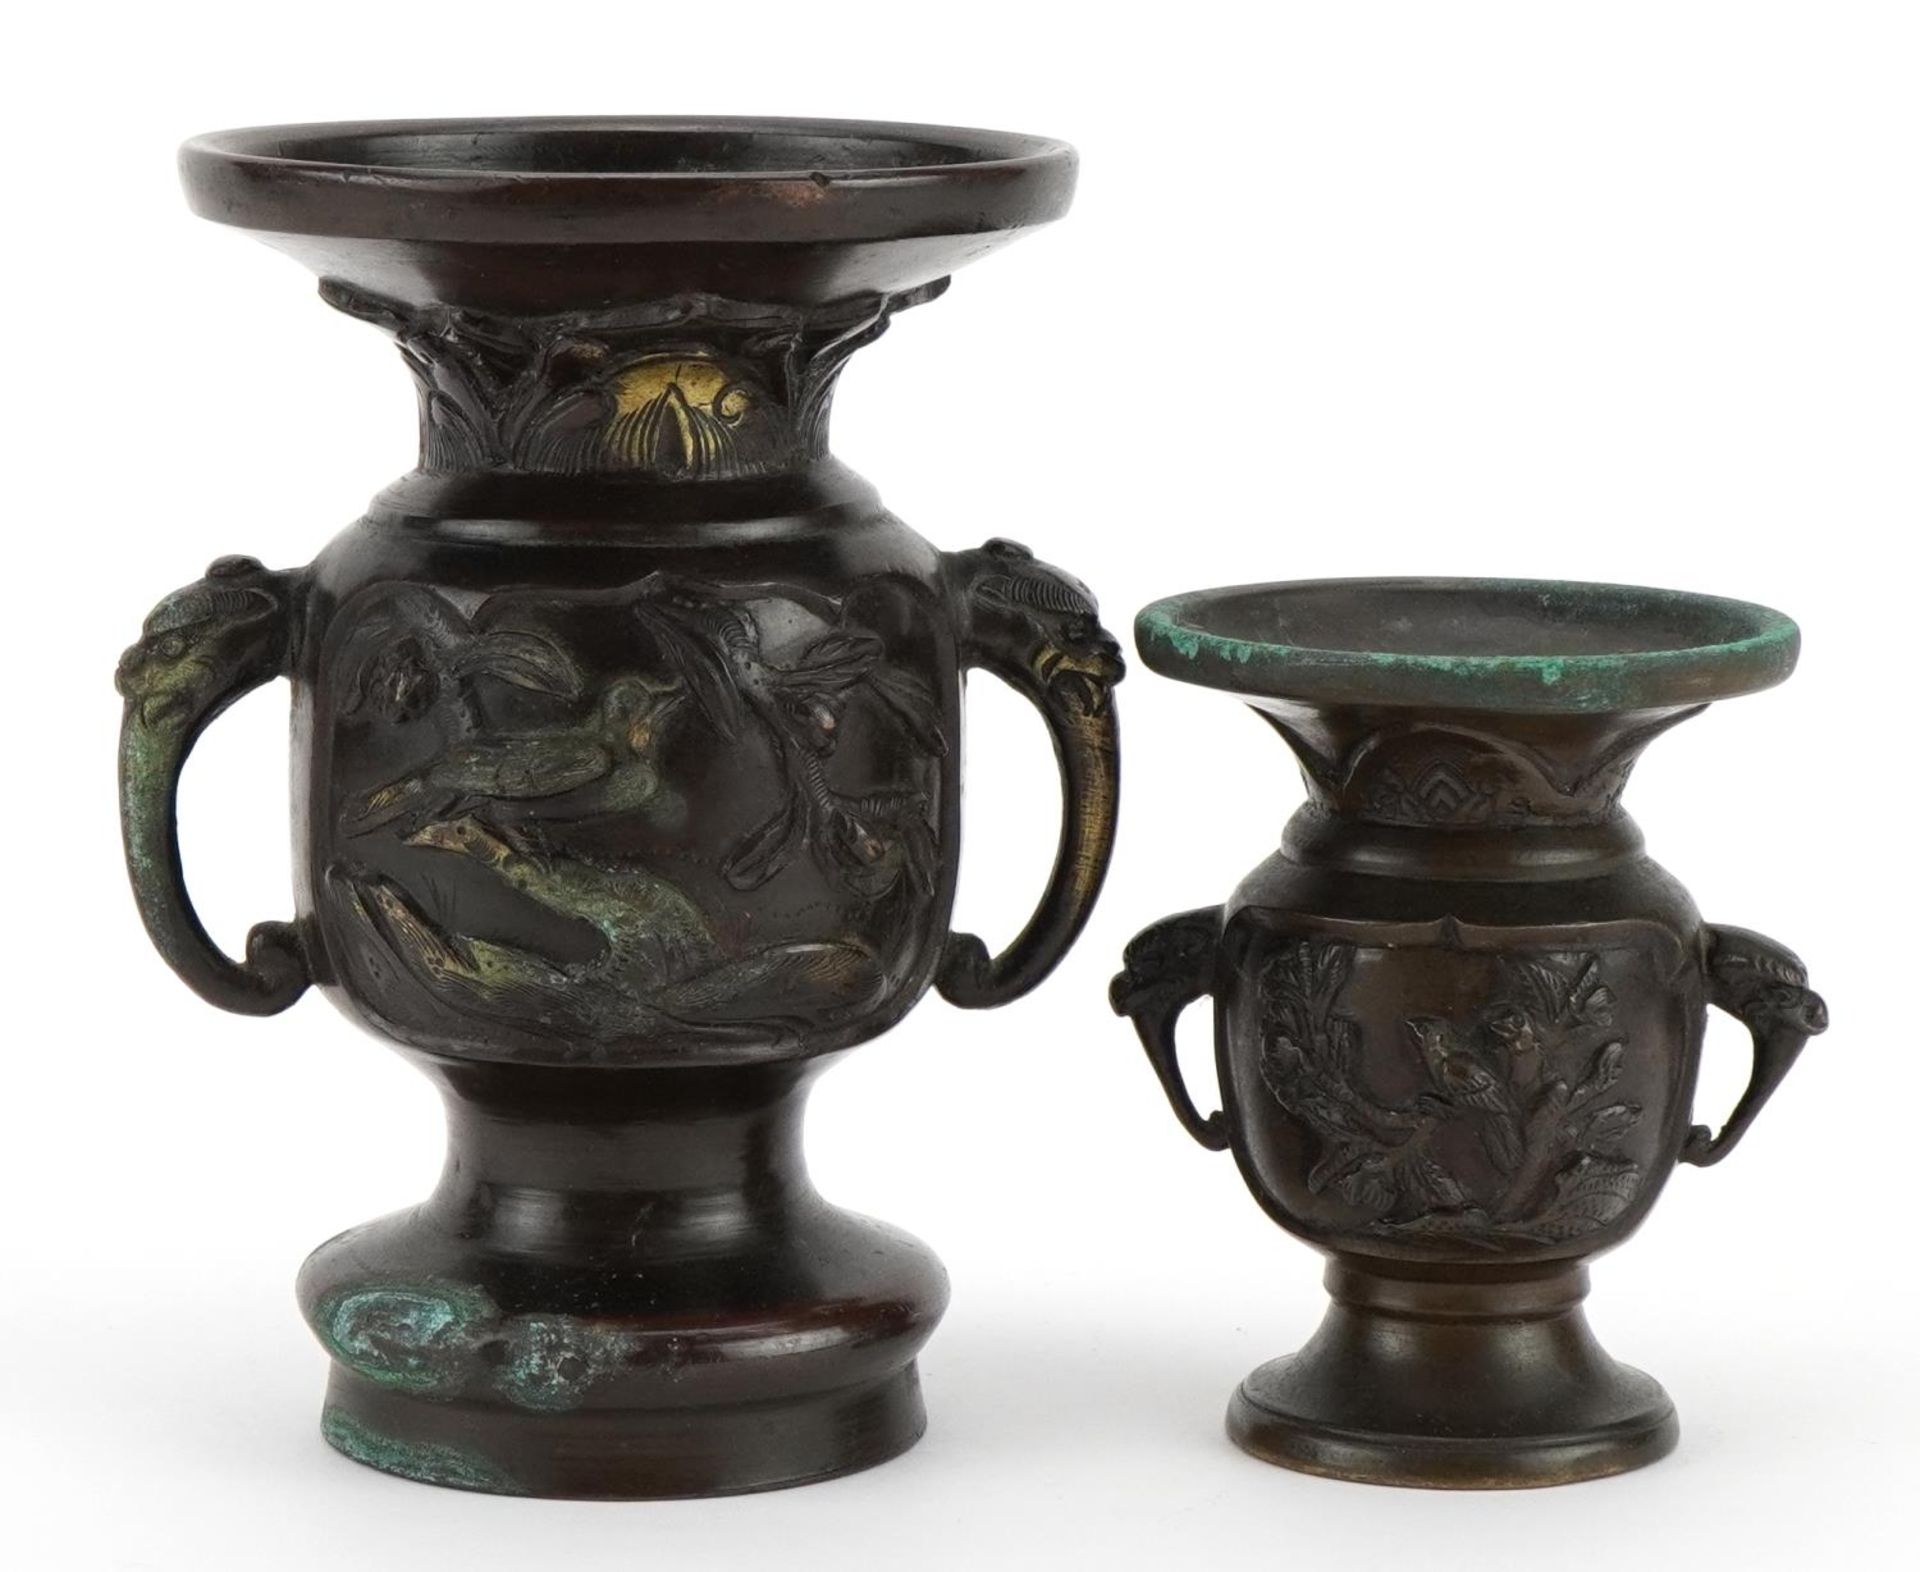 Two Japanese bronze vases, each with twin elephant head handles and decorated in relief with birds